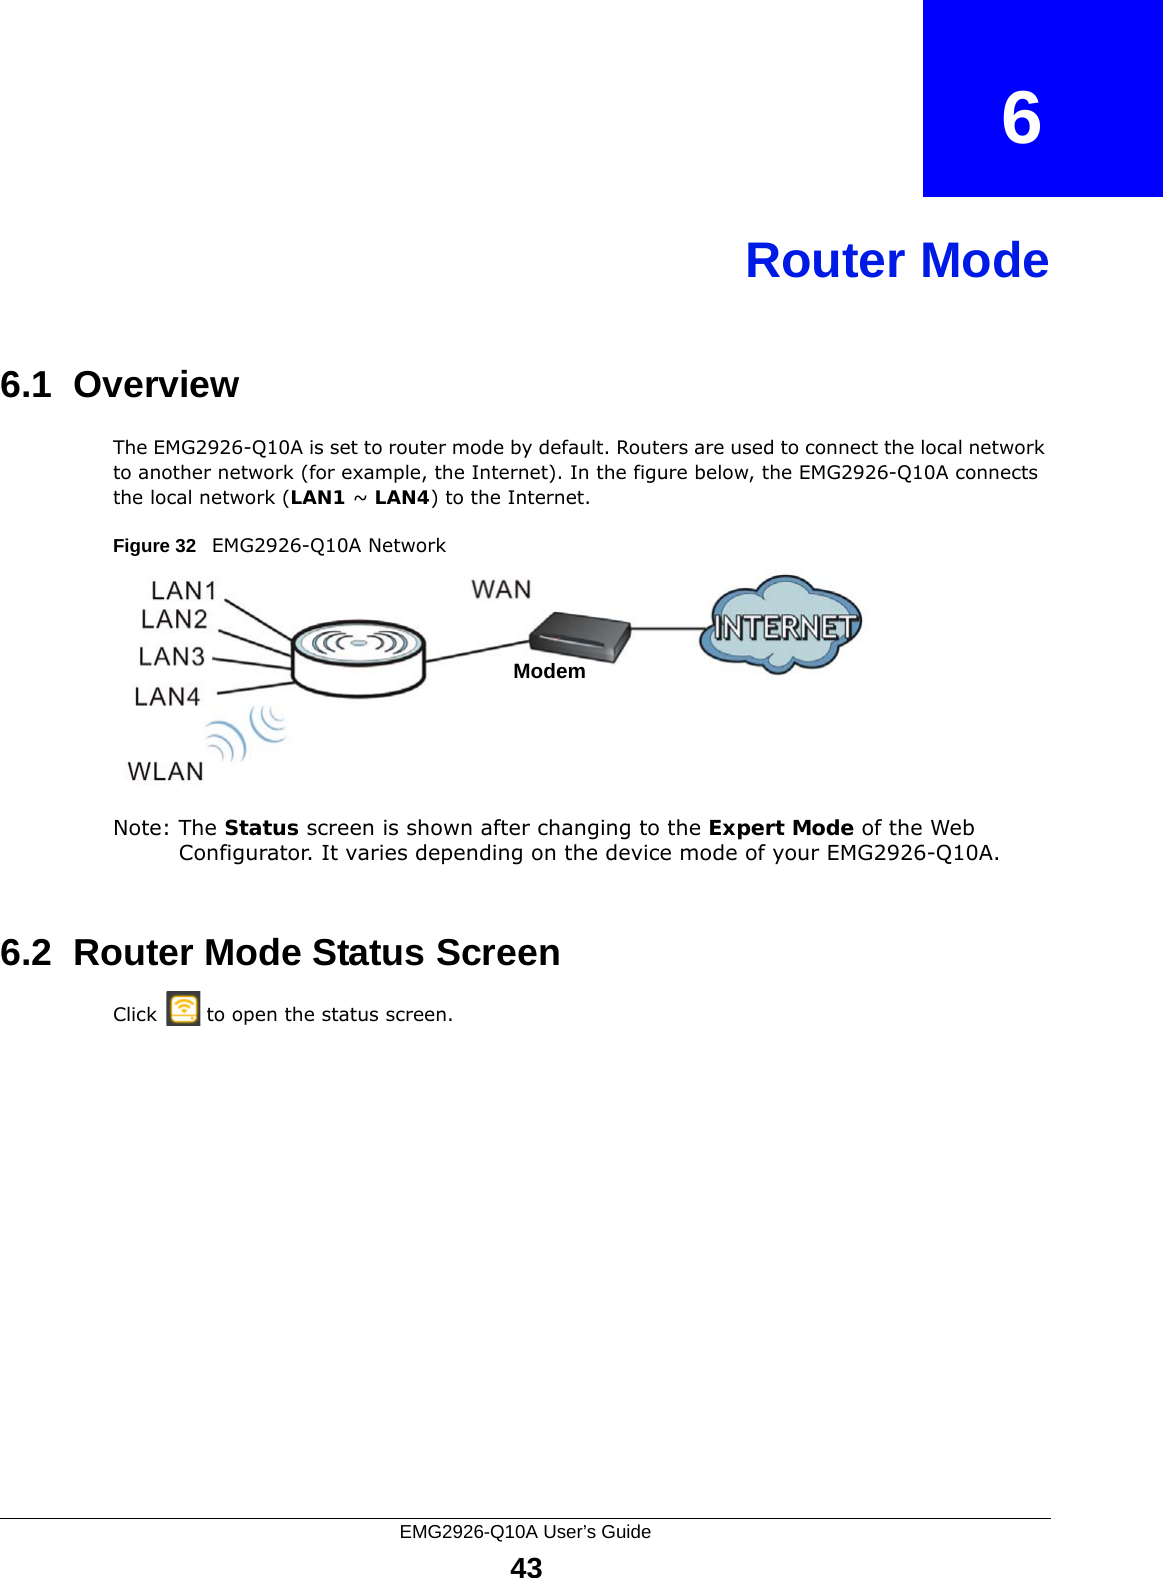 EMG2926-Q10A User’s Guide43CHAPTER   6Router Mode6.1  OverviewThe EMG2926-Q10A is set to router mode by default. Routers are used to connect the local network to another network (for example, the Internet). In the figure below, the EMG2926-Q10A connects the local network (LAN1 ~ LAN4) to the Internet.Figure 32   EMG2926-Q10A NetworkNote: The Status screen is shown after changing to the Expert Mode of the Web Configurator. It varies depending on the device mode of your EMG2926-Q10A.6.2  Router Mode Status ScreenClick   to open the status screen. Modem